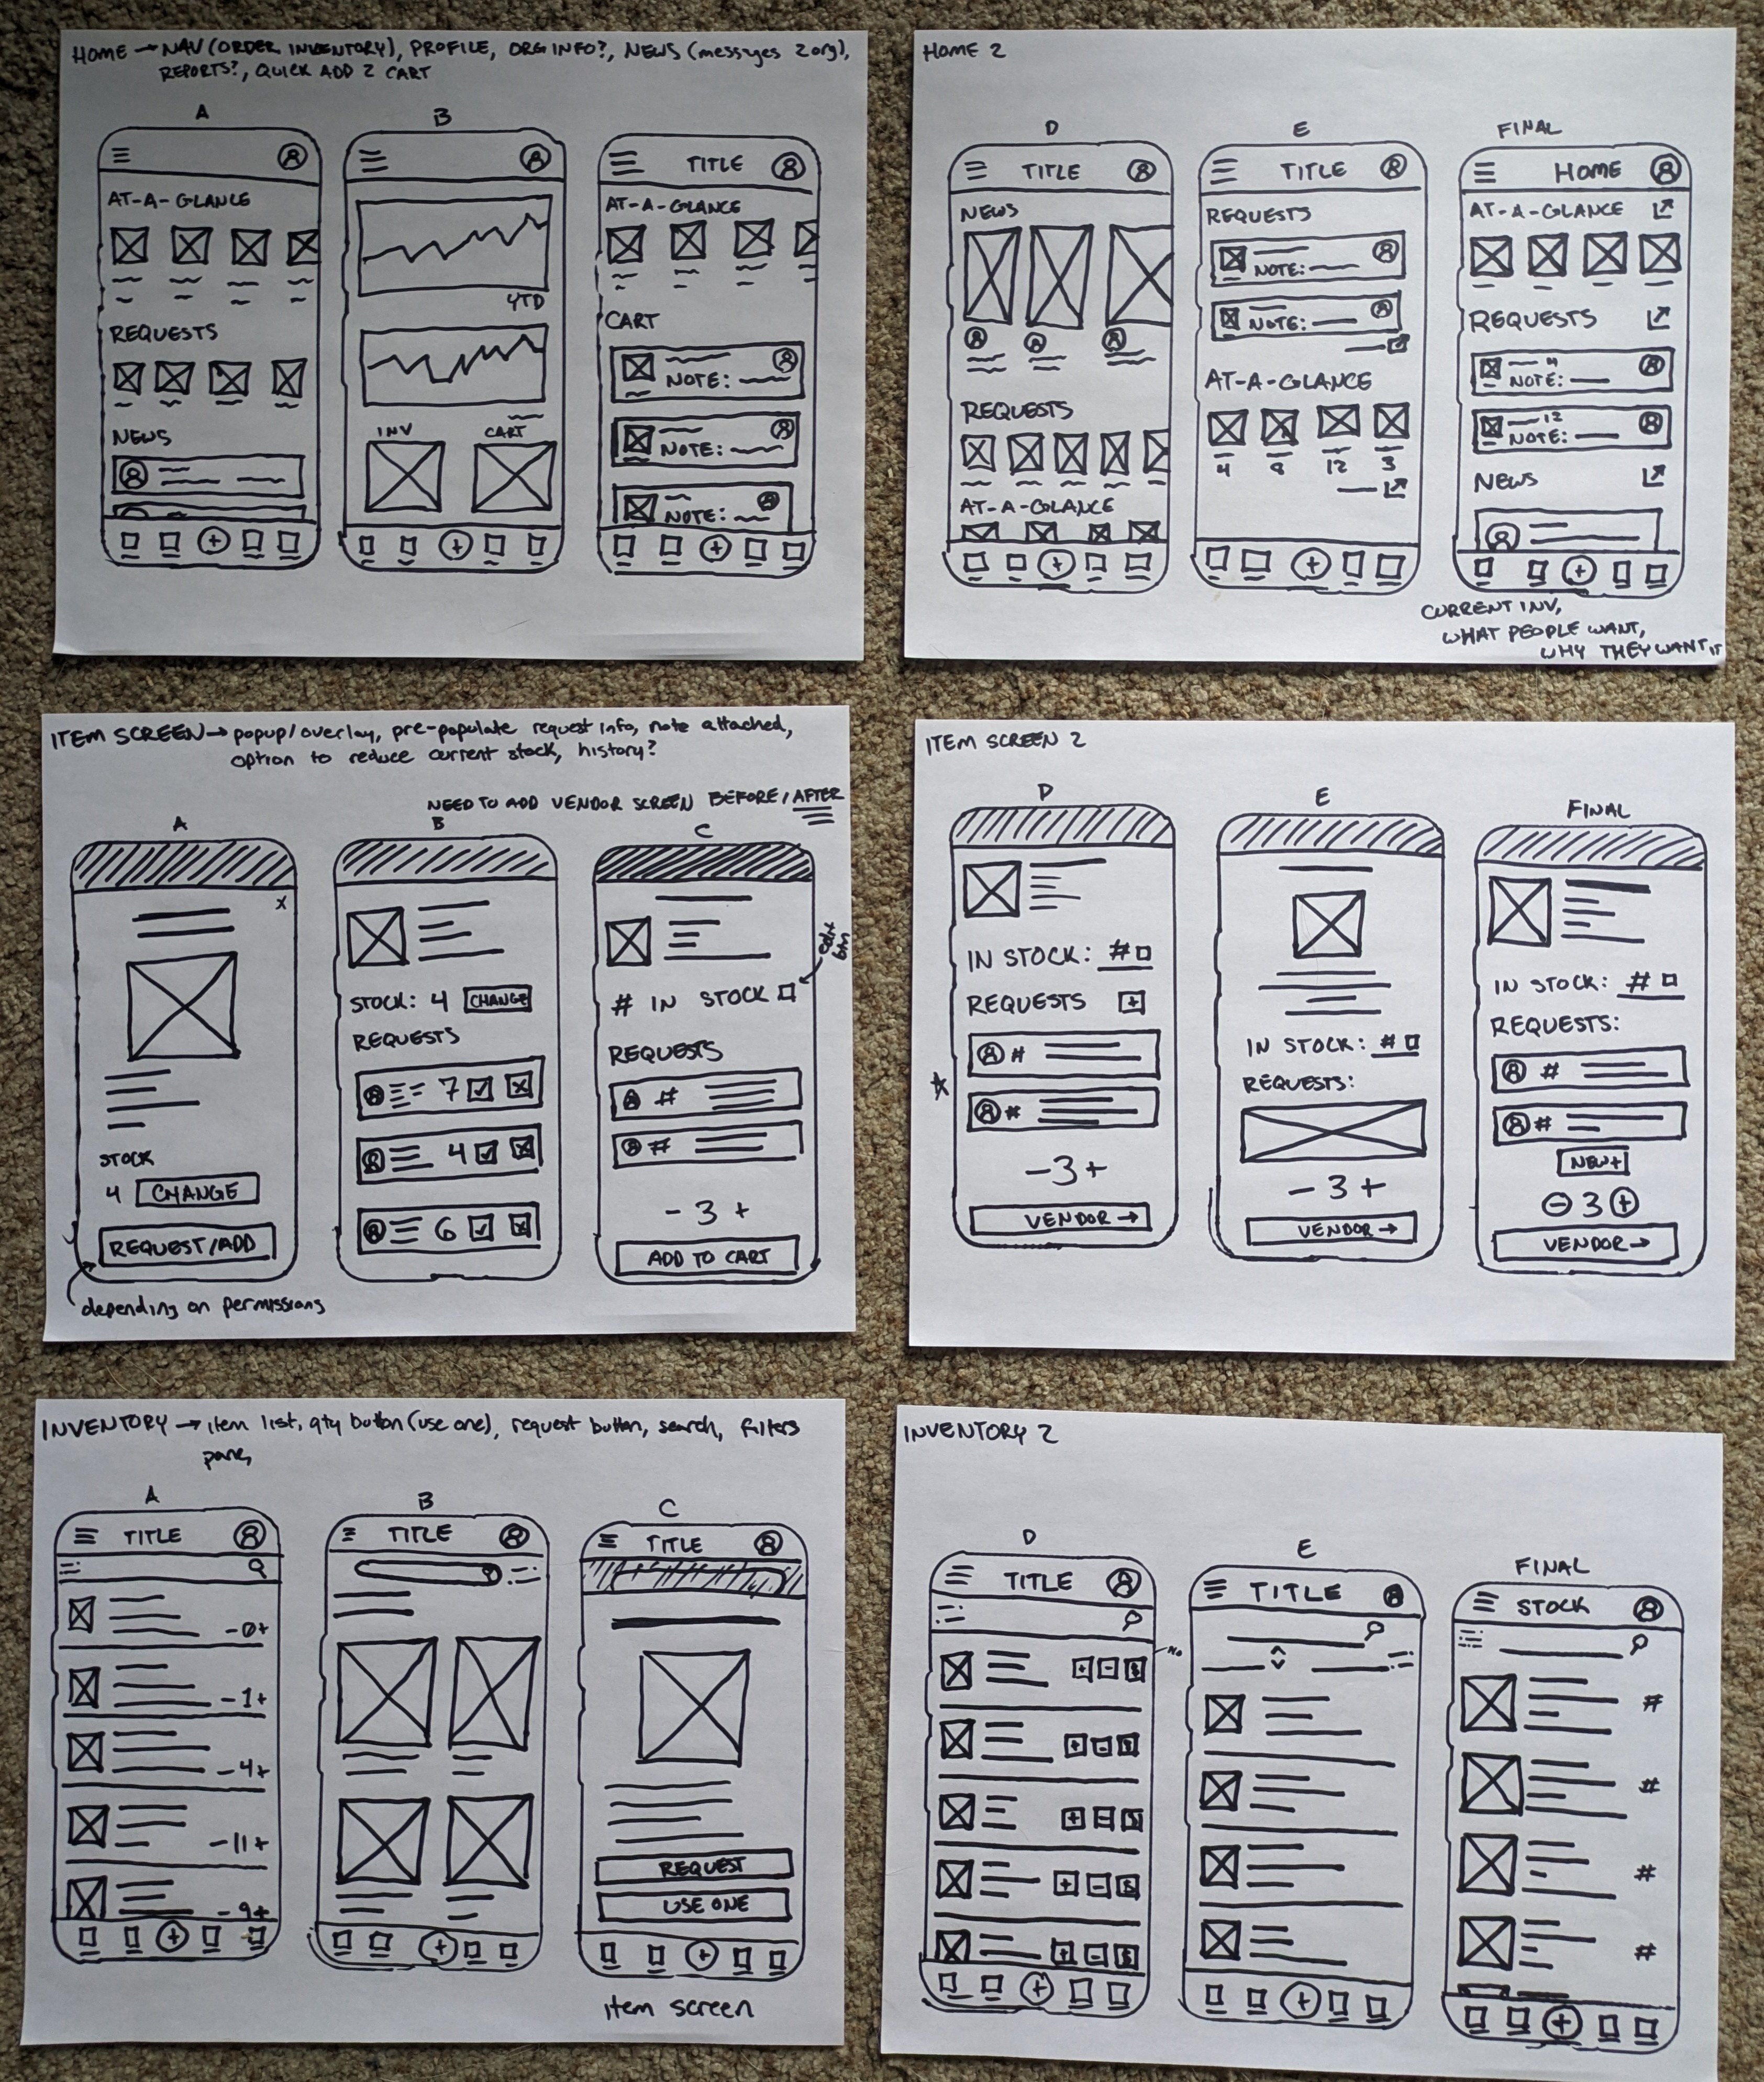 A picture of first-draft sketches, modelled after the Crazy Eights design exercise. Three features are shown: the home page, the items page, and the inventory page. Each feature has 5 potential designs including one final version.